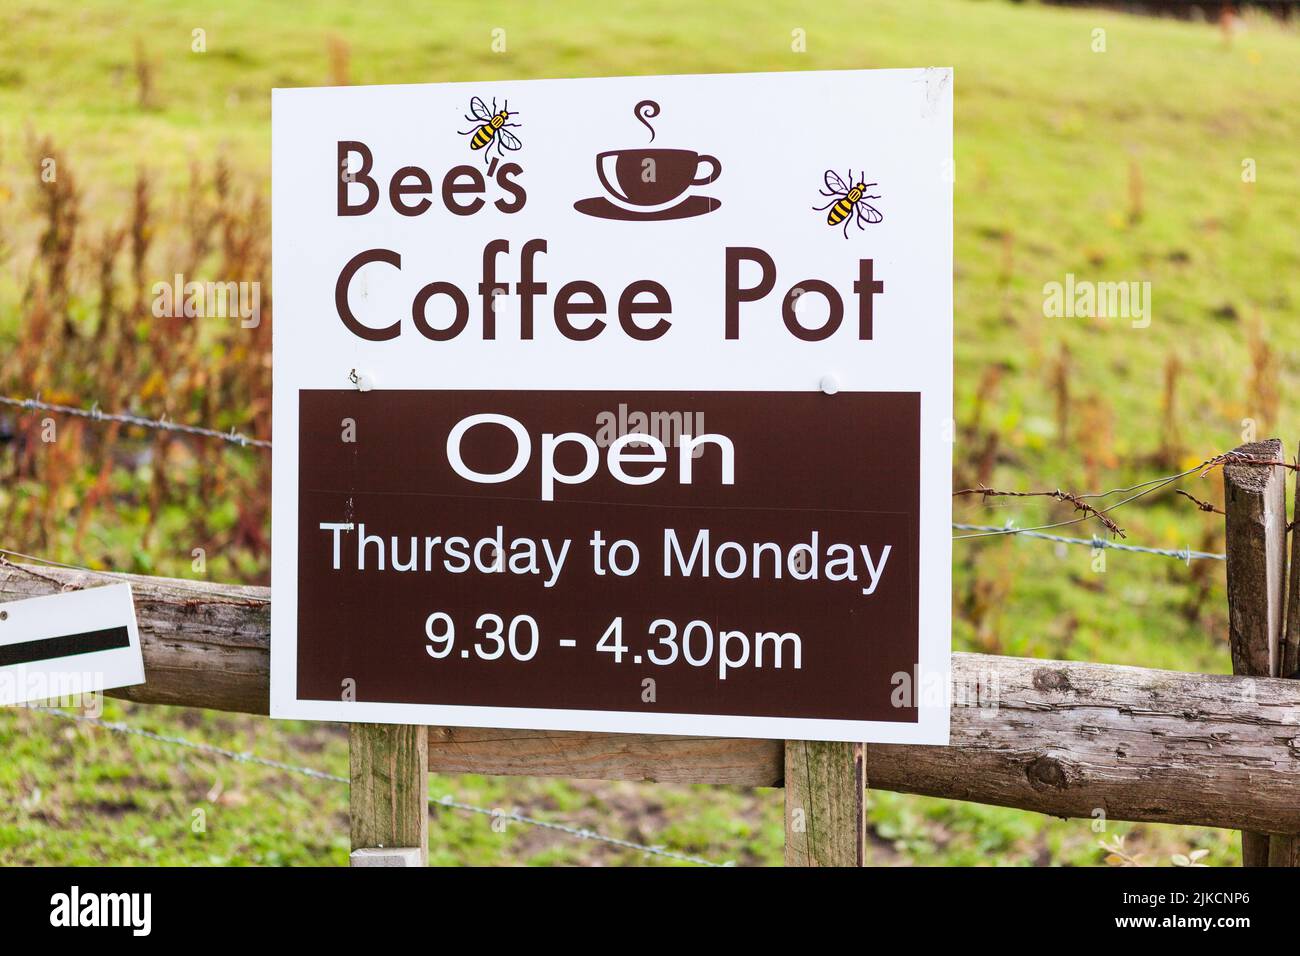 Bee's Coffee Pot opening times sign Stock Photo